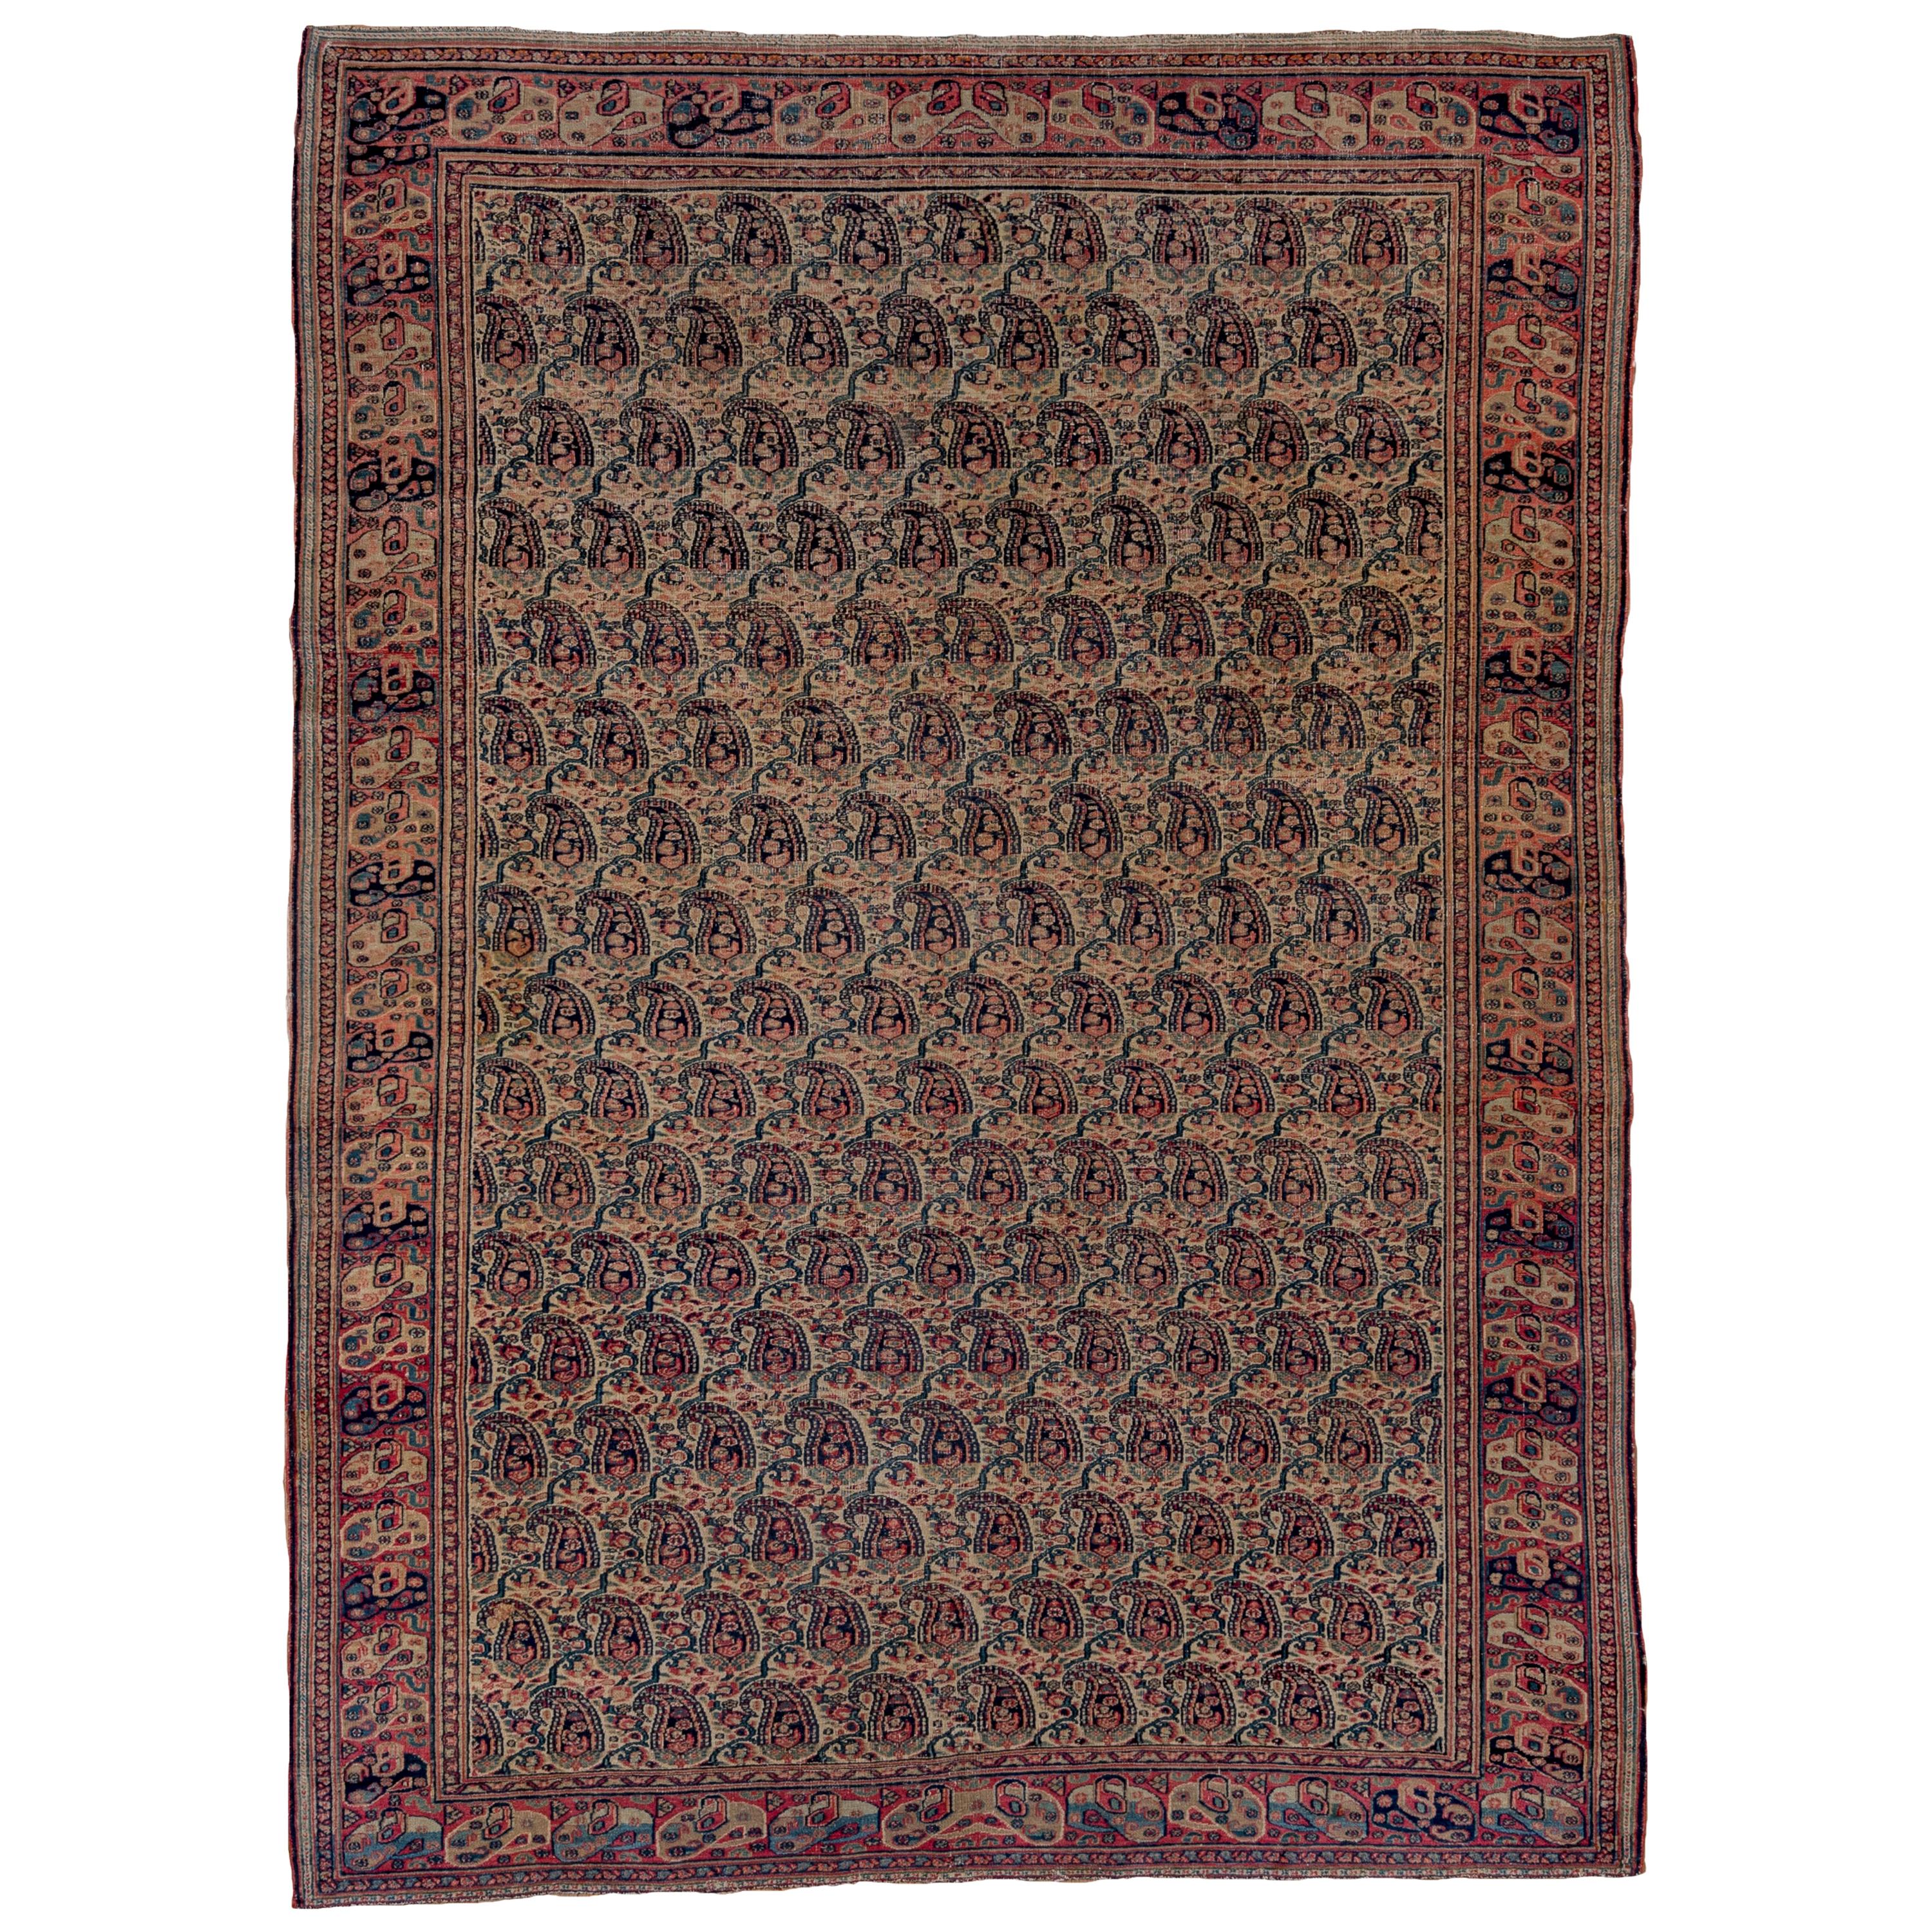 Fine Antique Persian Khorassan Rug, All-Over Paisley Field, circa 1900s